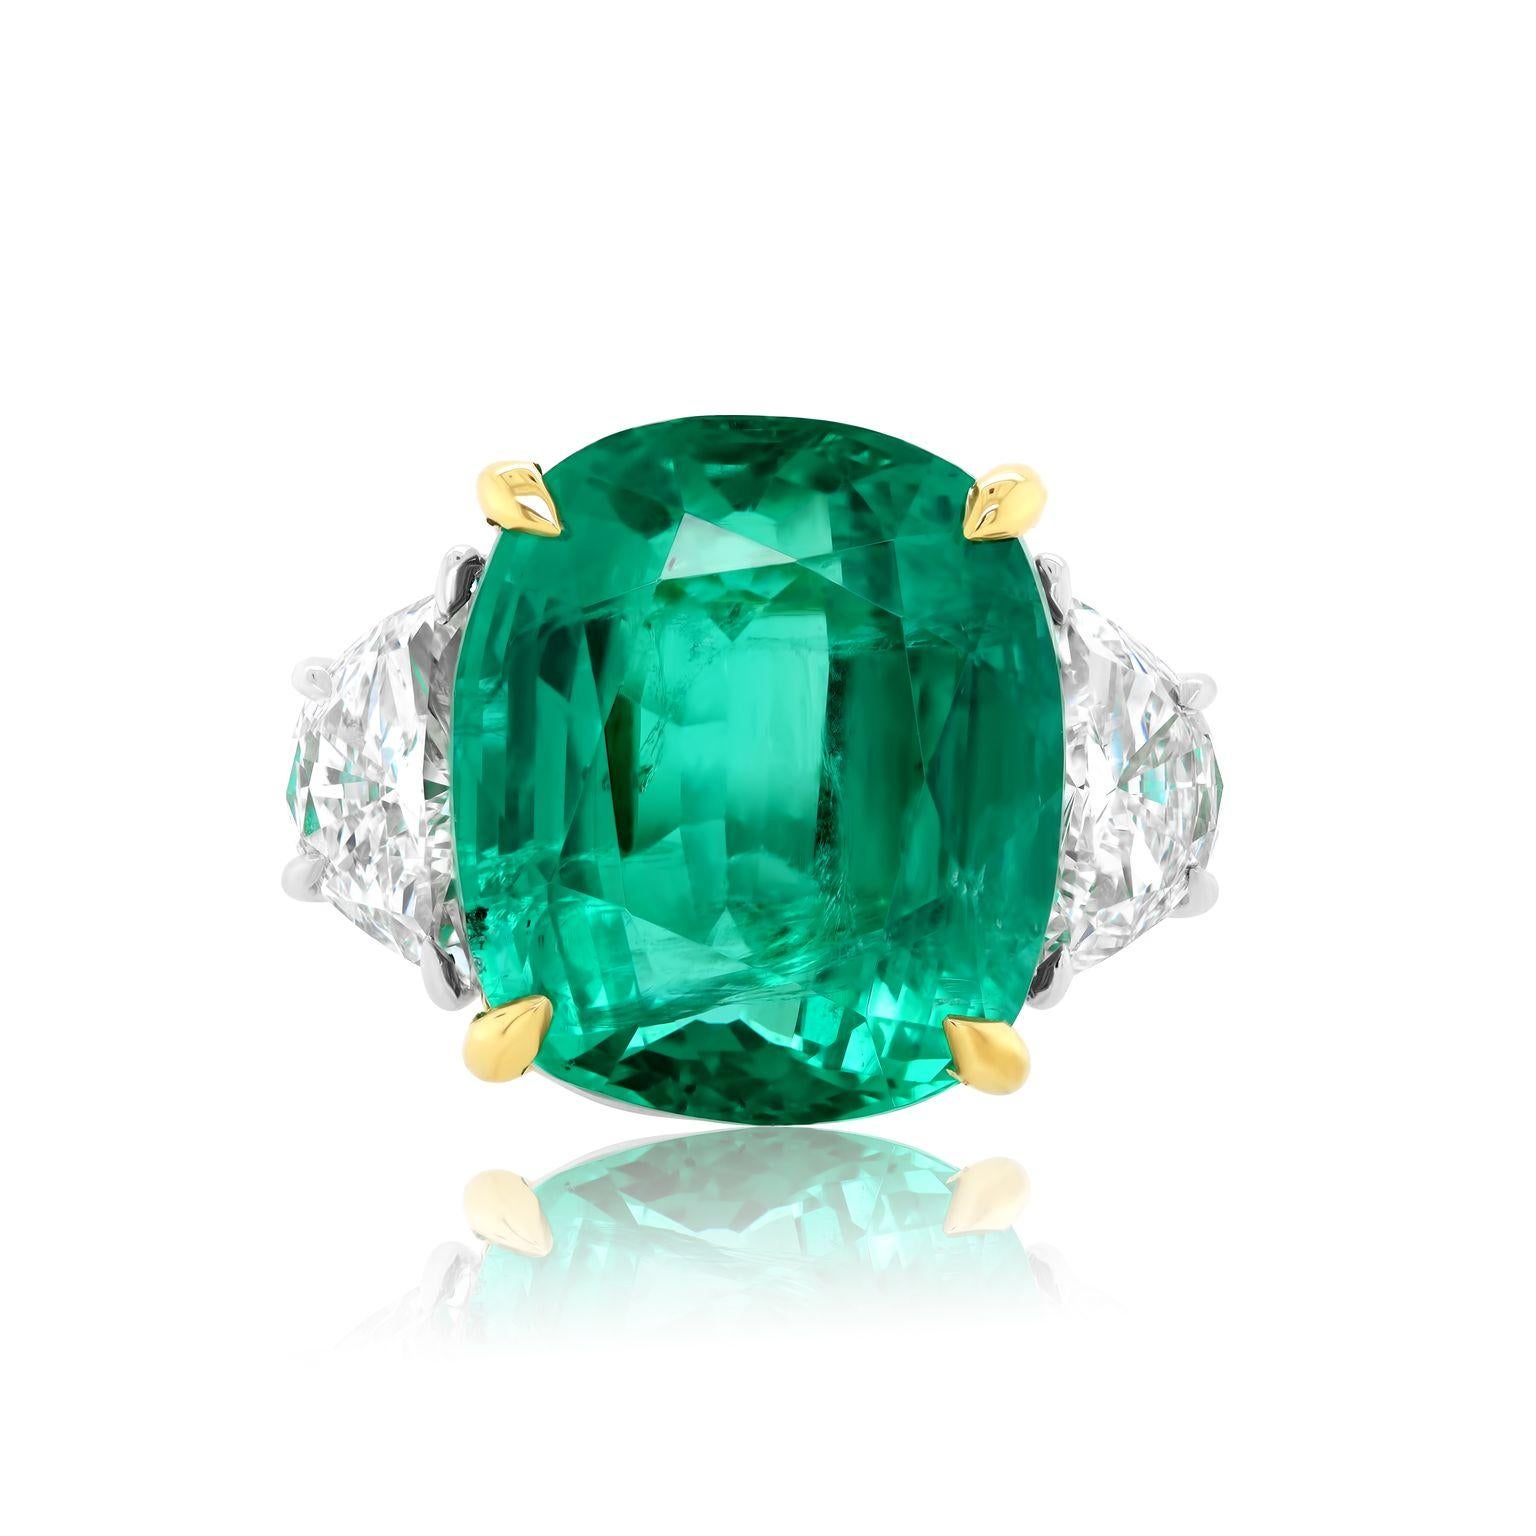 Platinum and 18 kt yellow gold emerald diamond ring featuring a 13.50 ct cushion cut emerald with 2 half moon diamonds on each side totaling 1.69 cts tw (certified).
Diana M. is a leading supplier of top-quality fine jewelry for over 35 years.
Diana